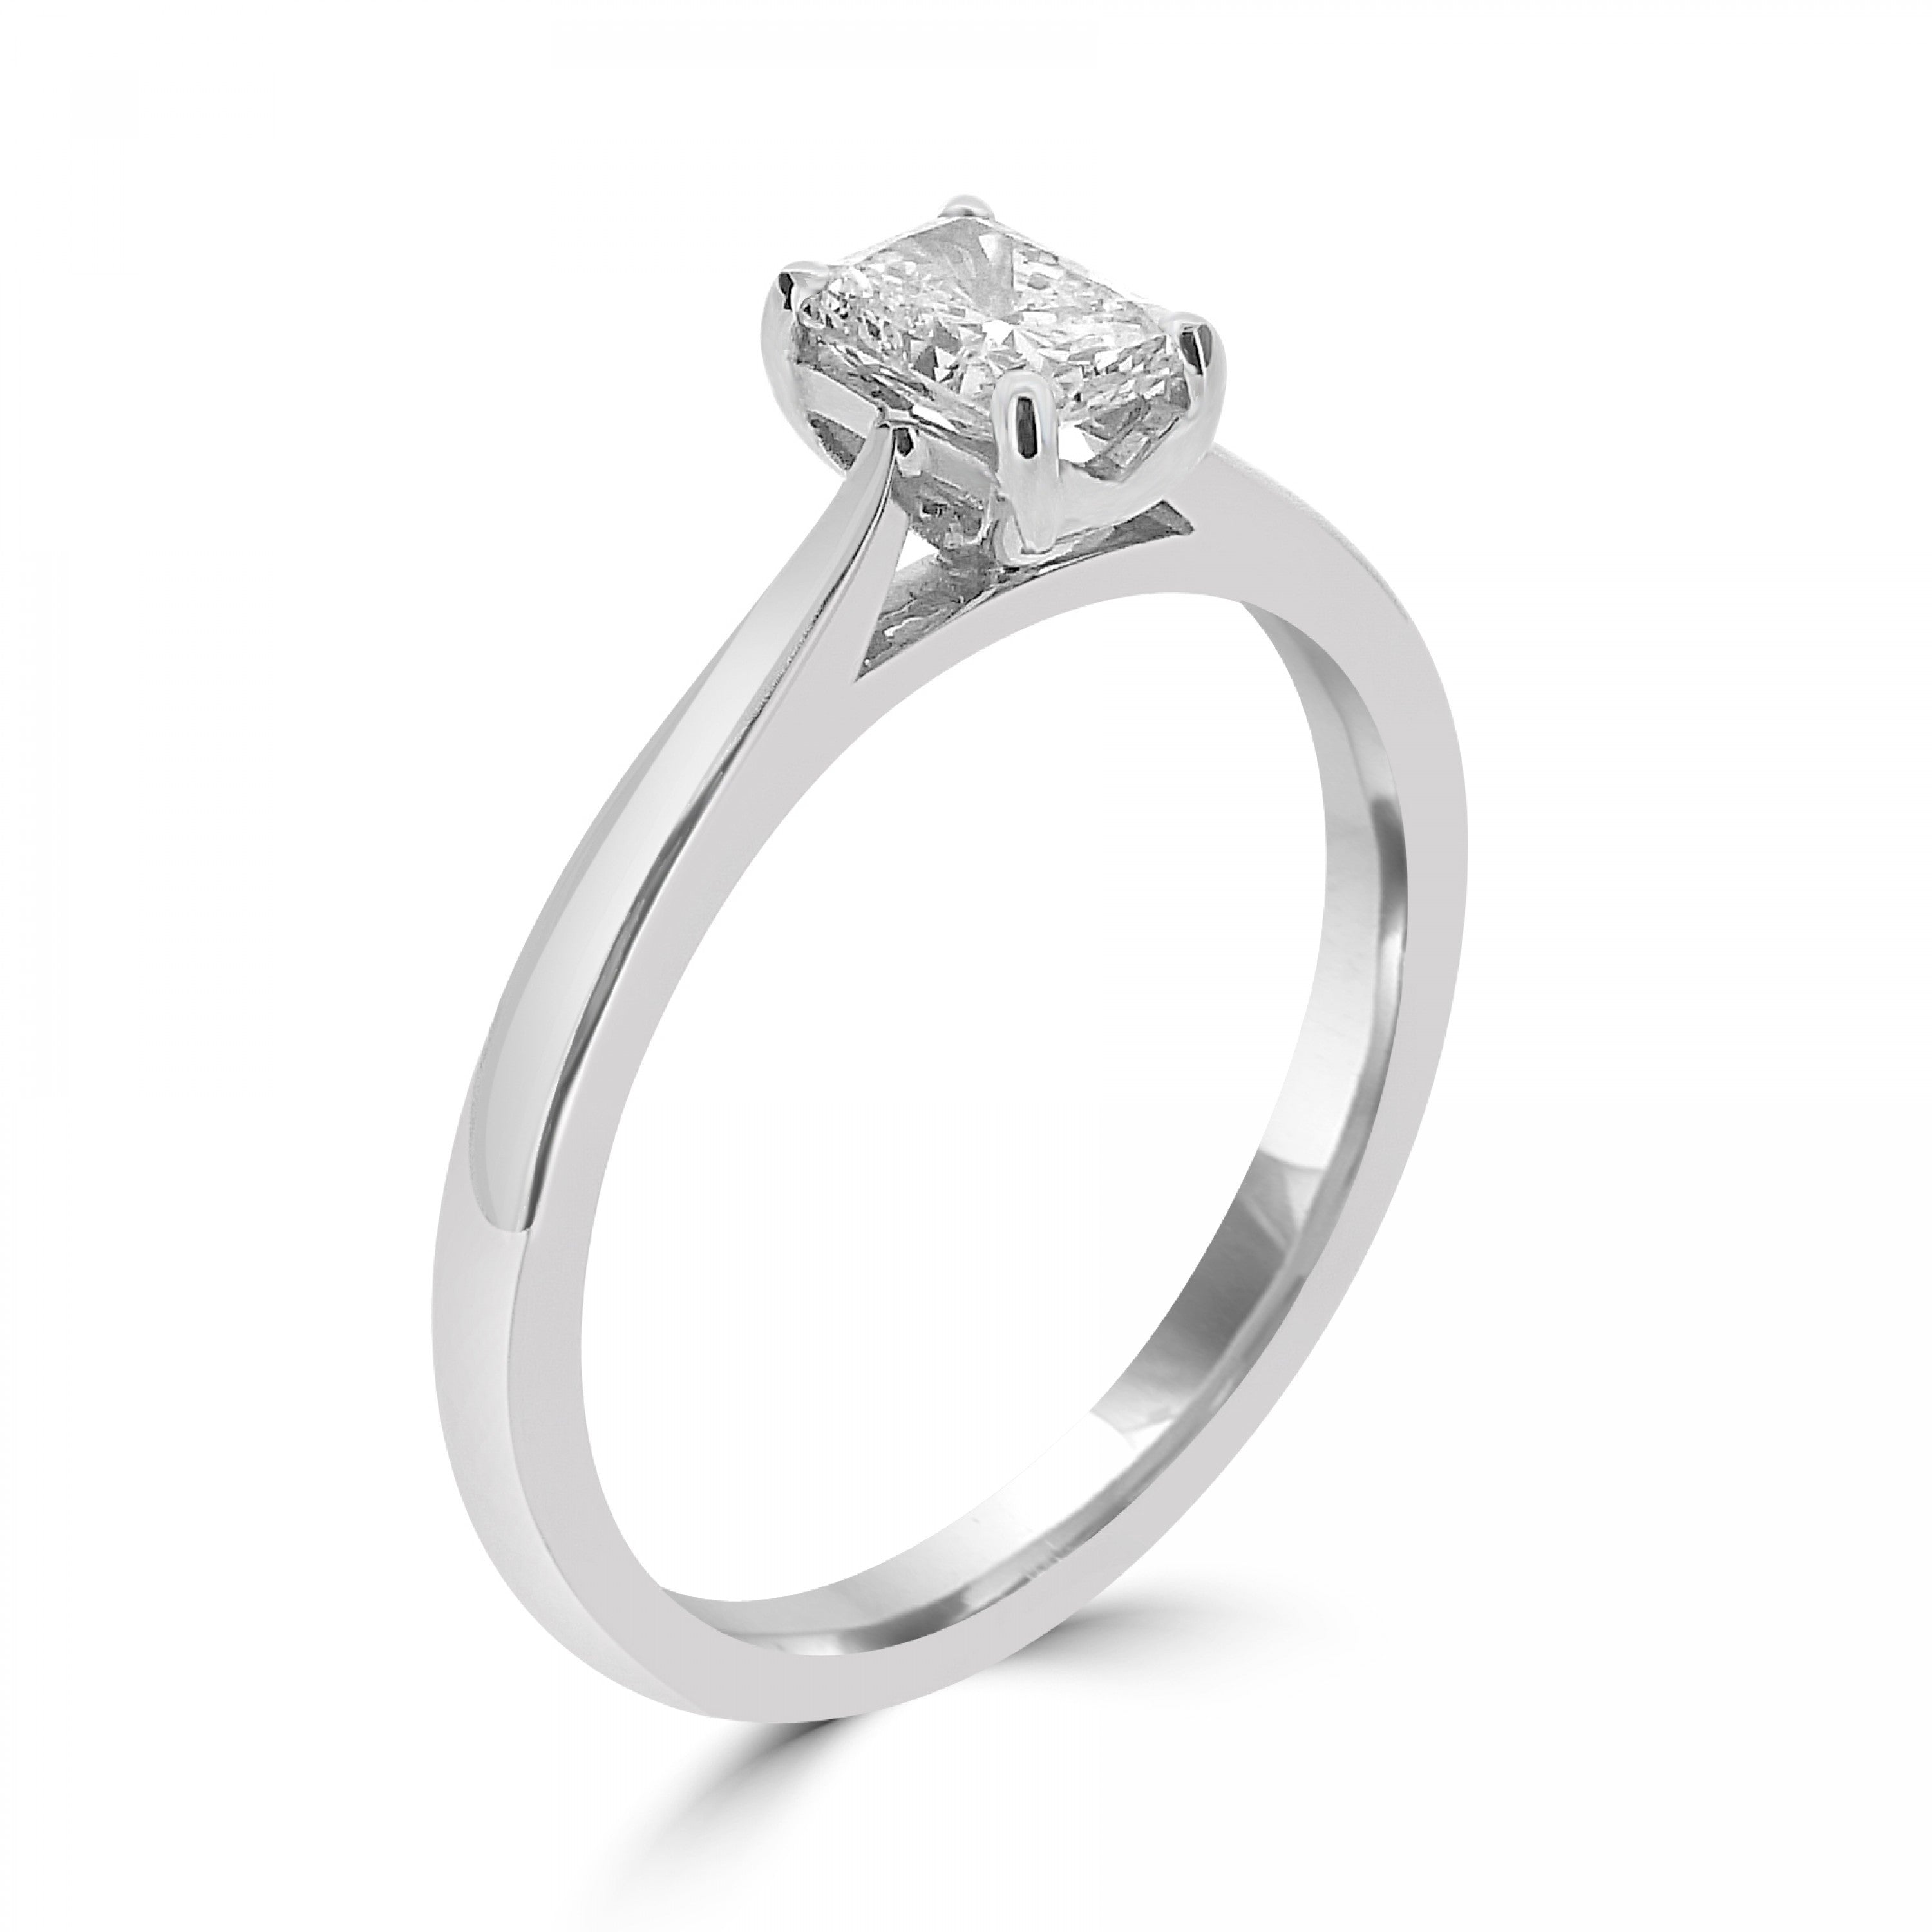 RADIANT CUT DIAMOND SOLITAIRE ENGAGEMENT RING